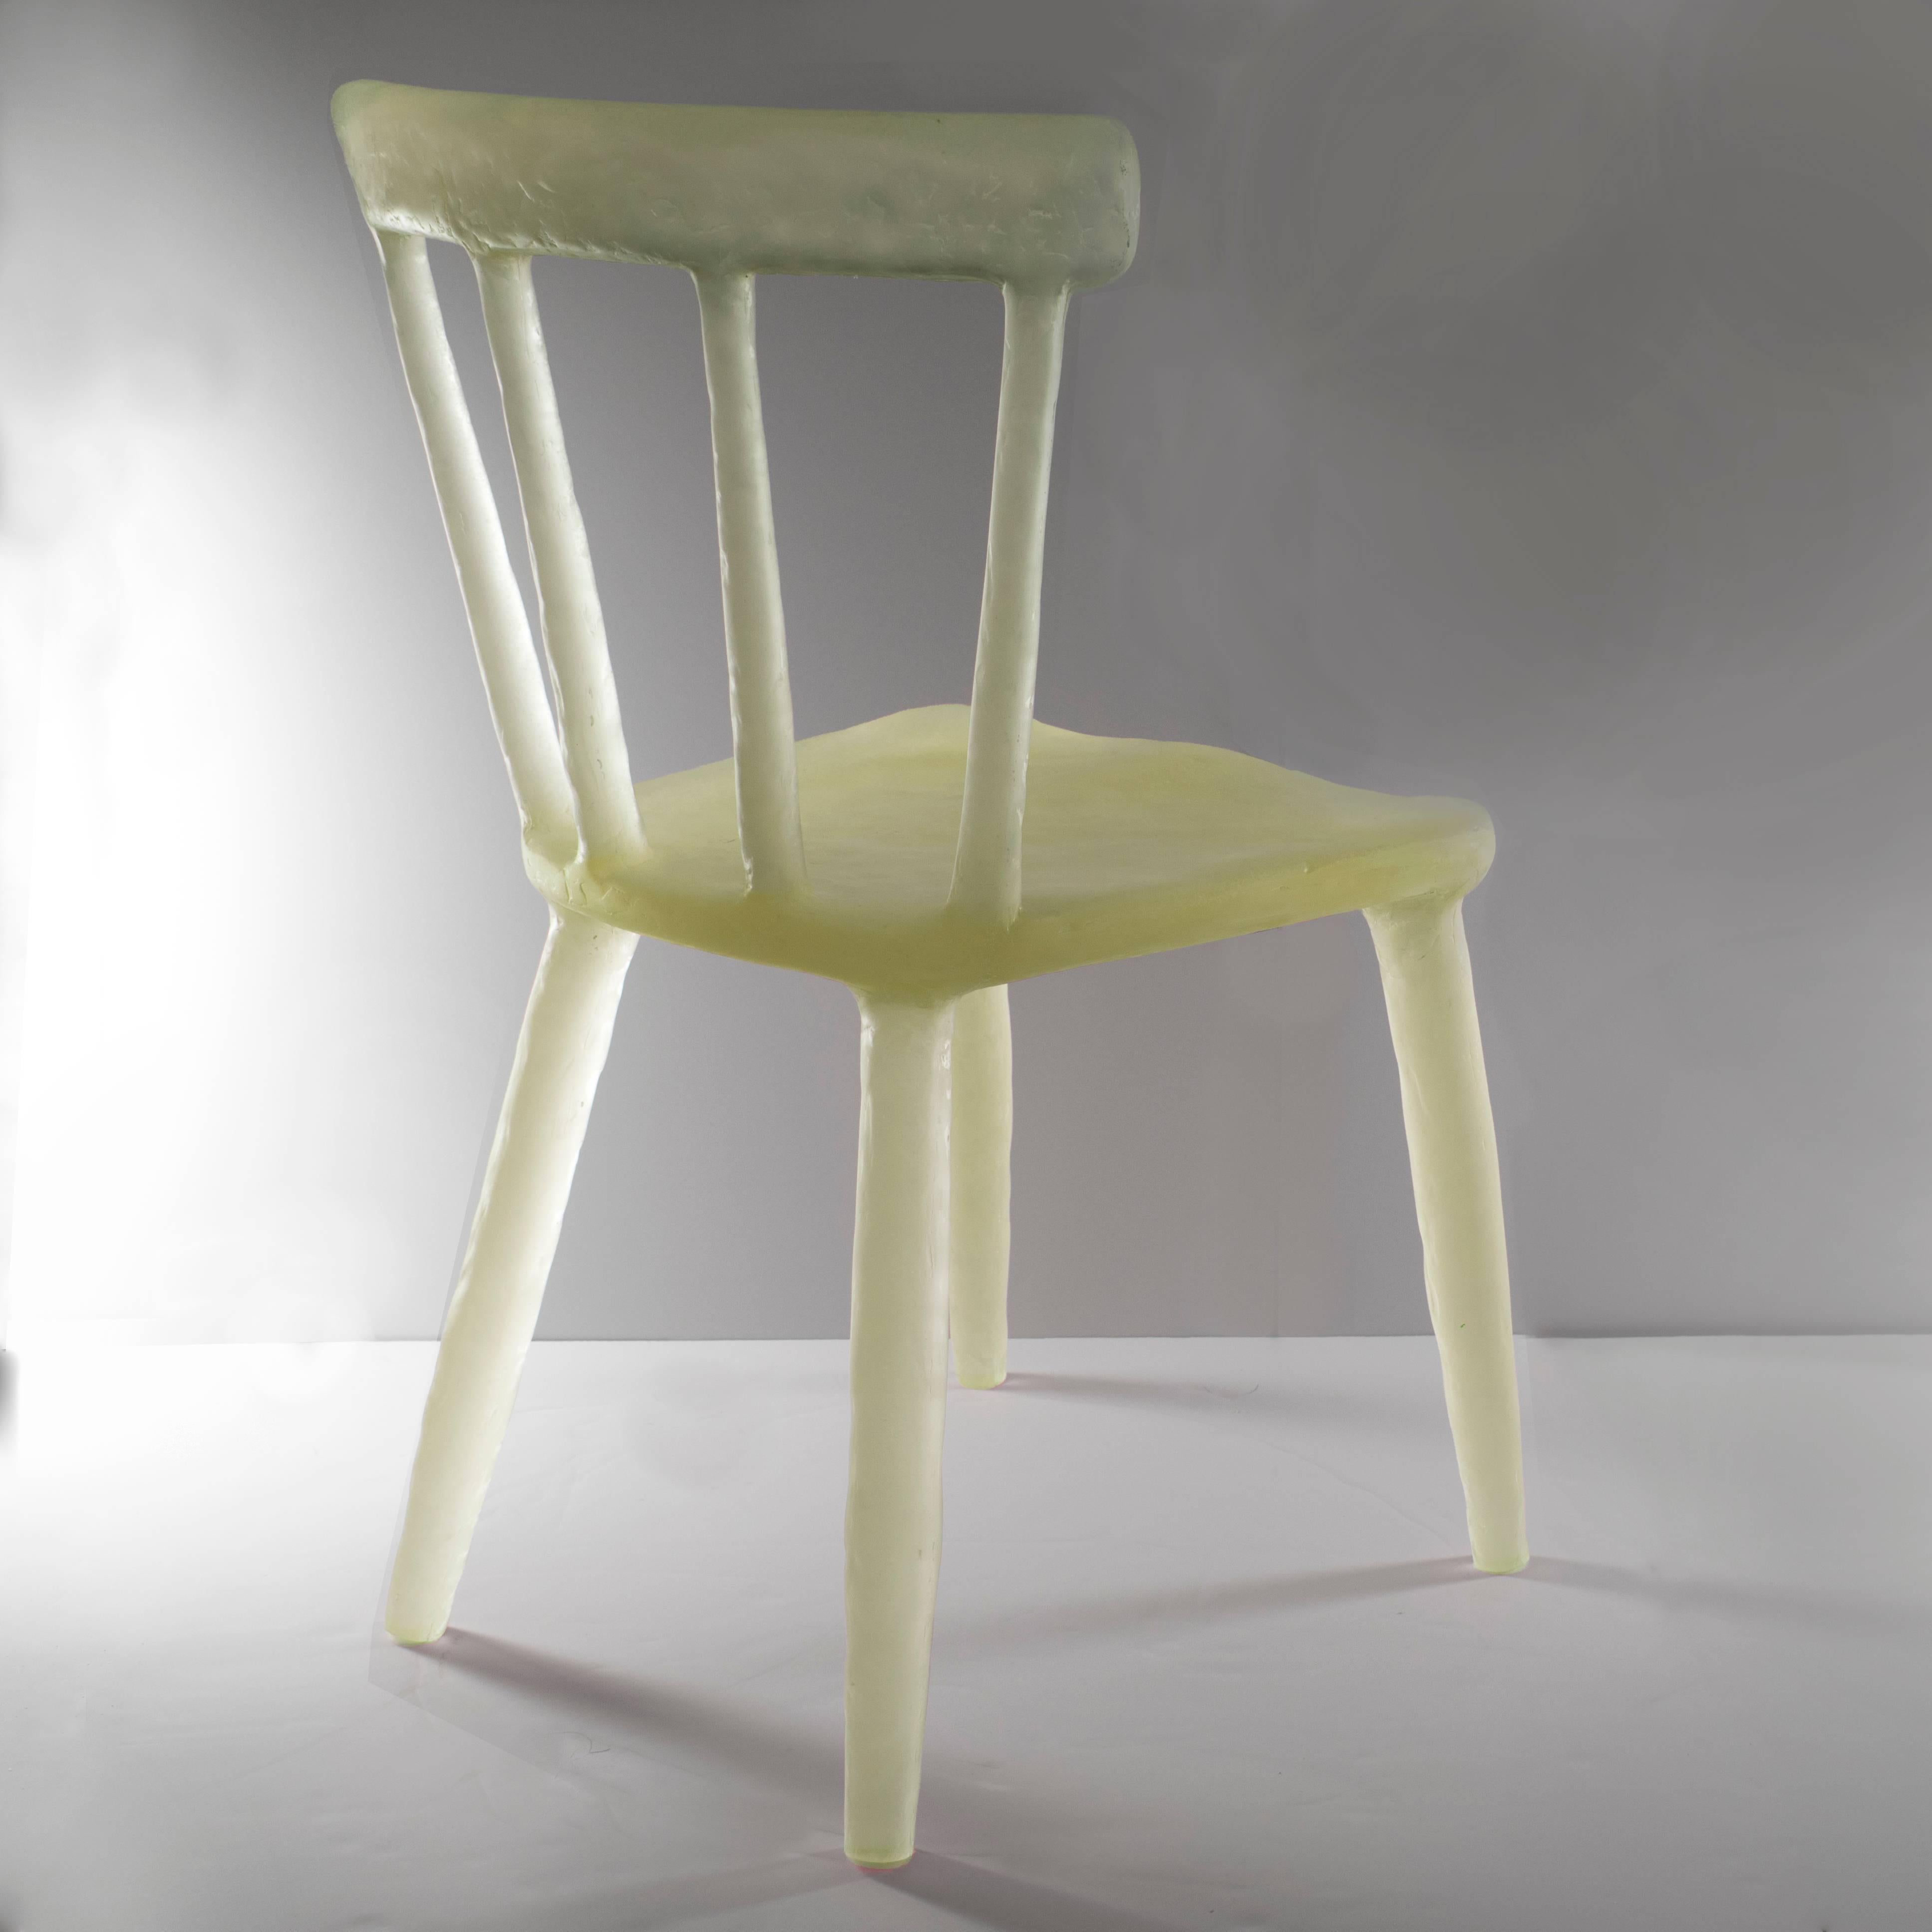 American Glow Chair by Kim Markel in Yellow, Handmade from Cast Recycled Resin / Acrylic For Sale